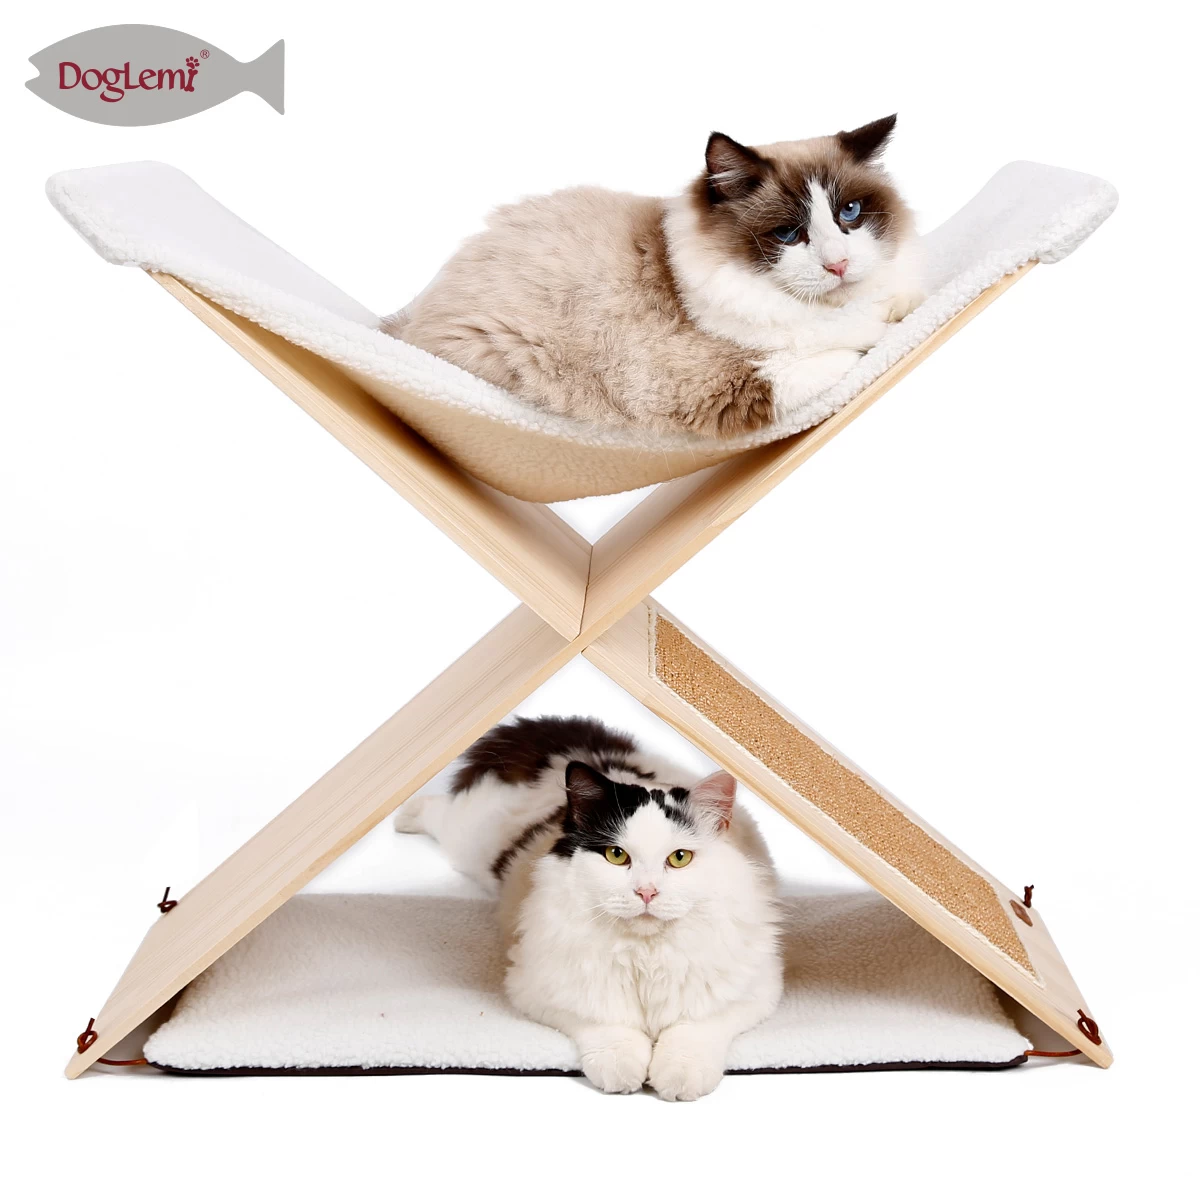 X-shaped cat stand